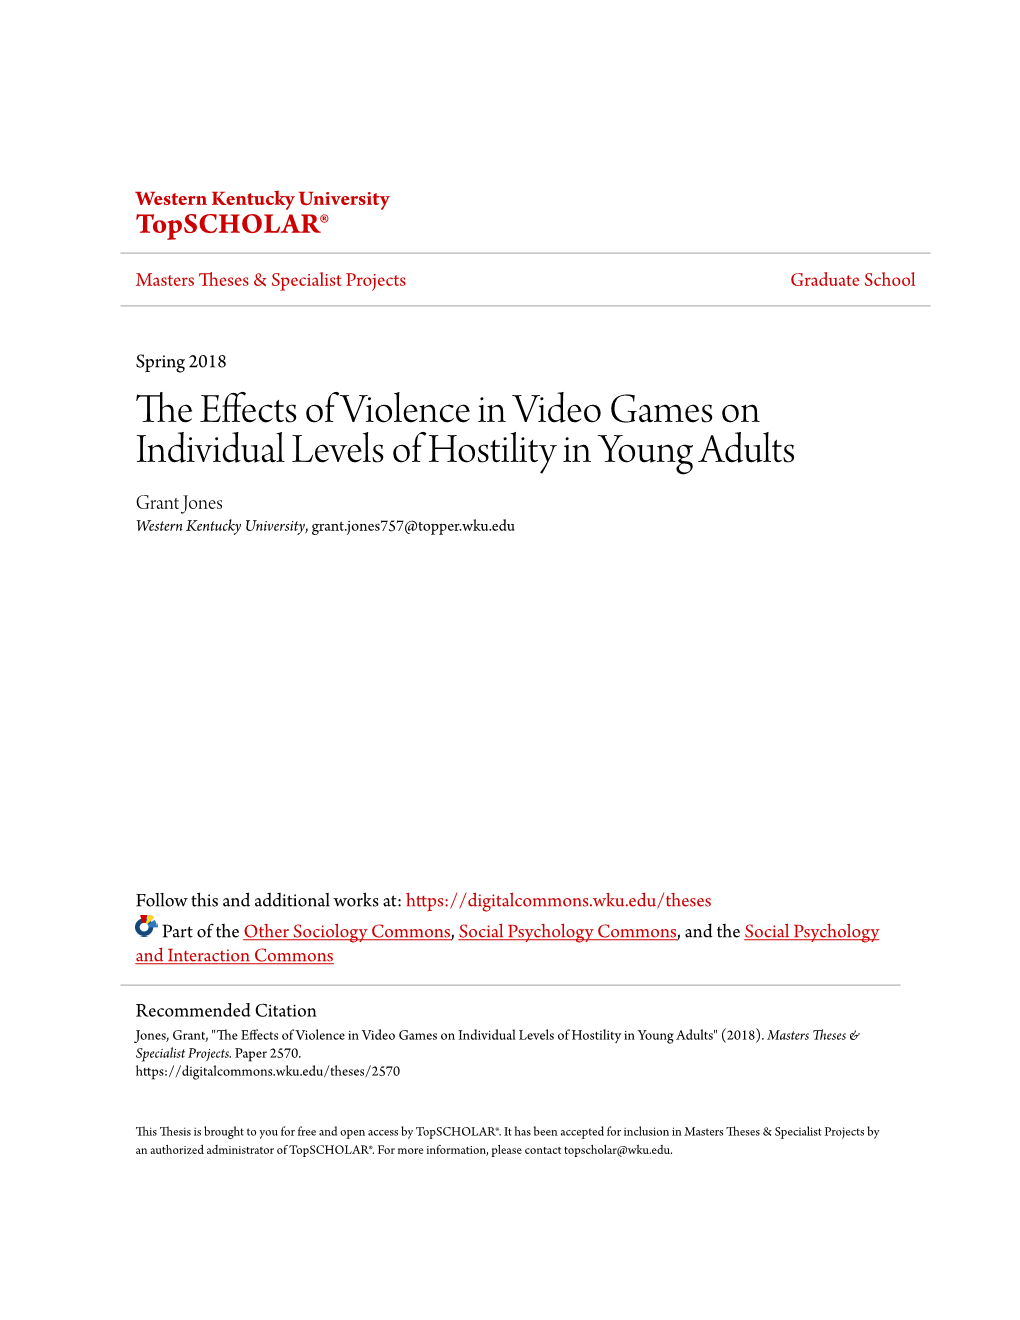 The Effects of Violence in Video Games on Individual Levels of Hostility in Young Adults" (2018)